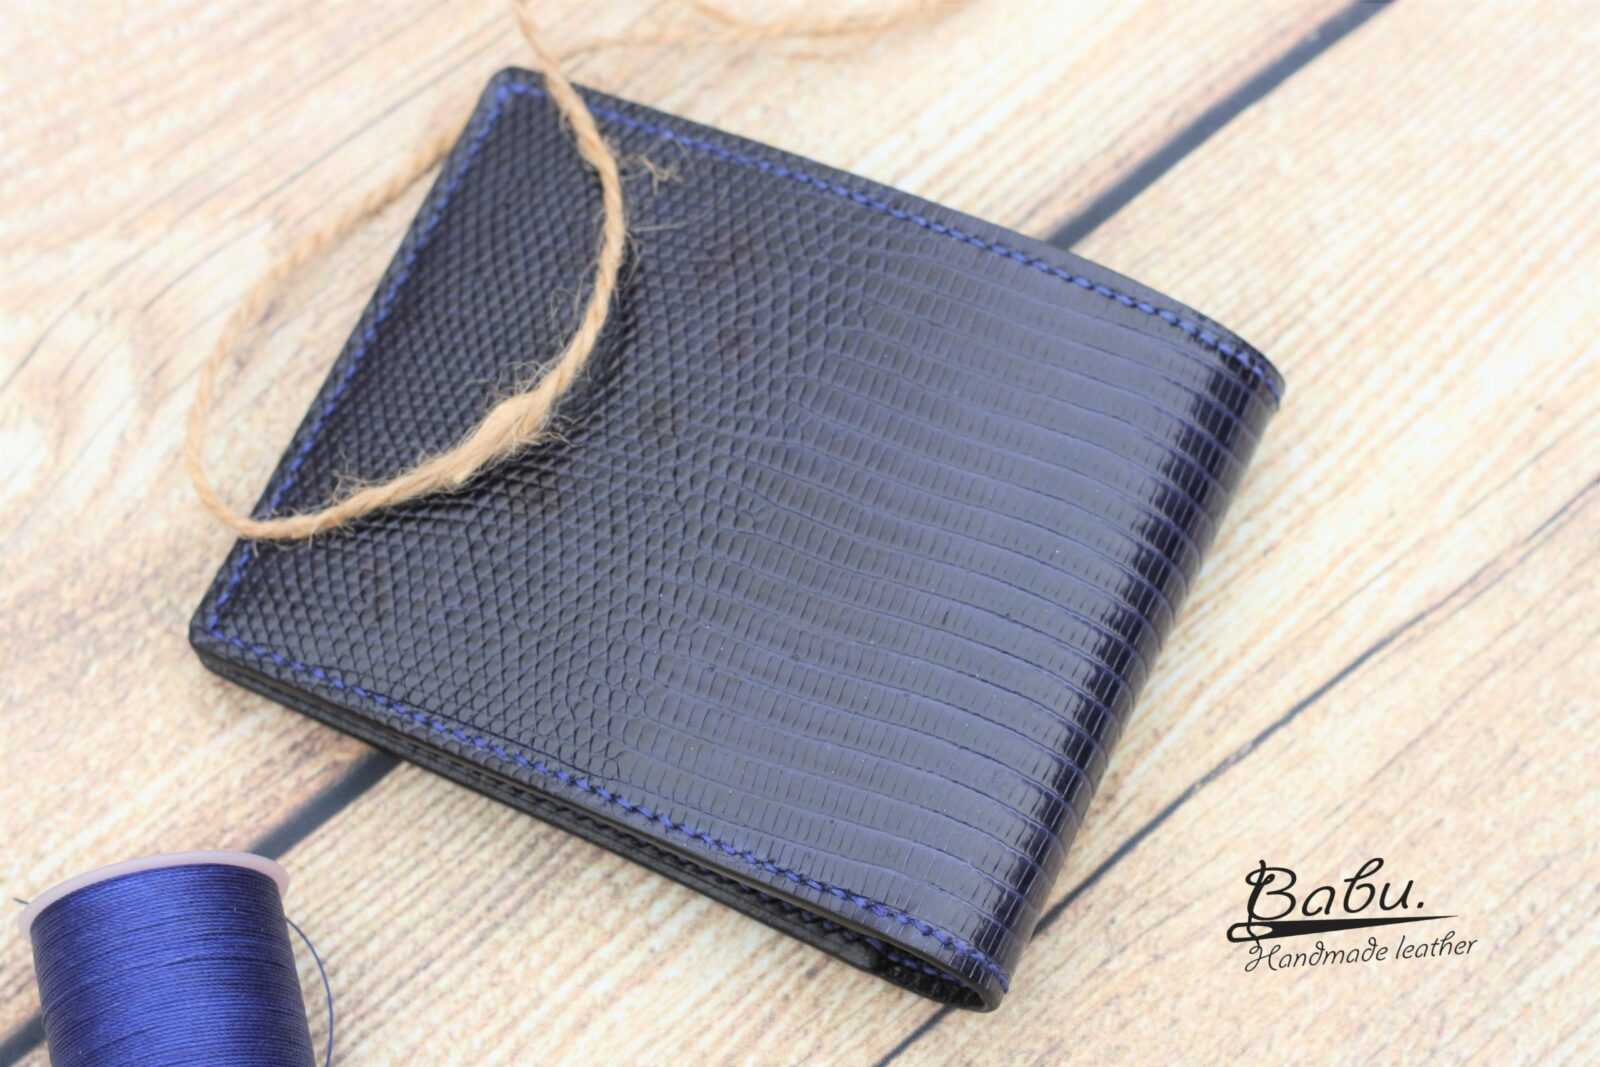 How to maintain alligator leather wallets